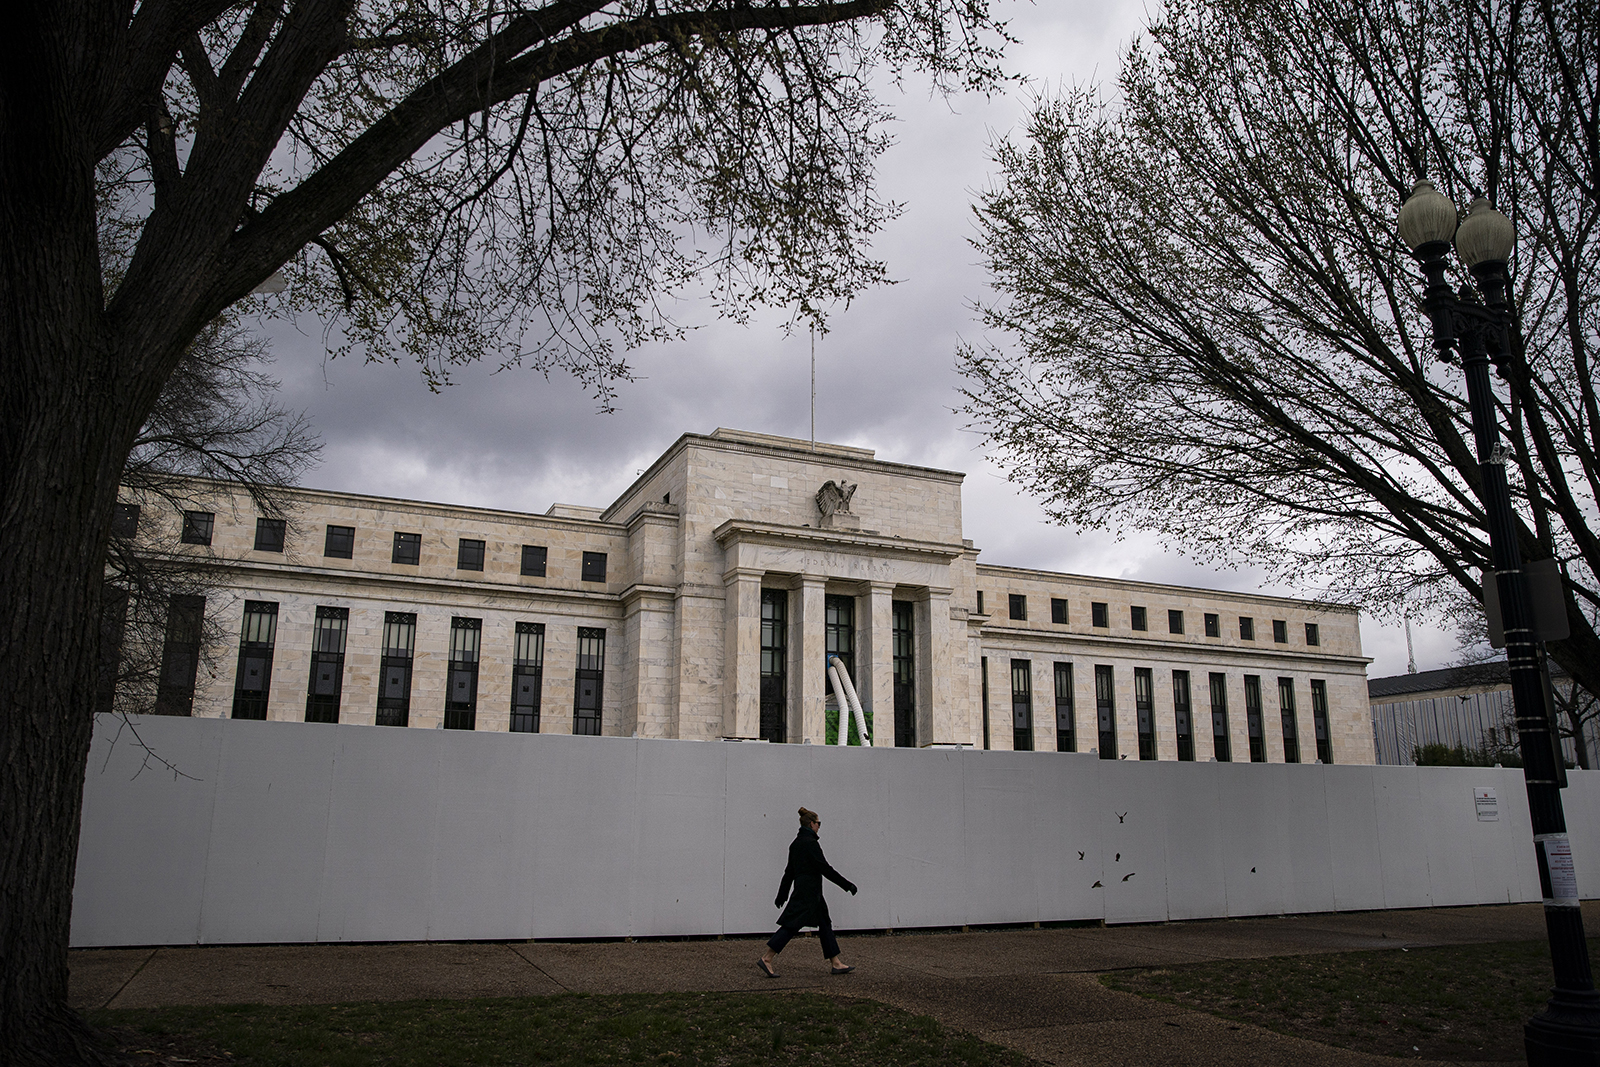 The Marriner S. Eccles Federal Reserve building in Washington, DC, on Monday, March 13, 